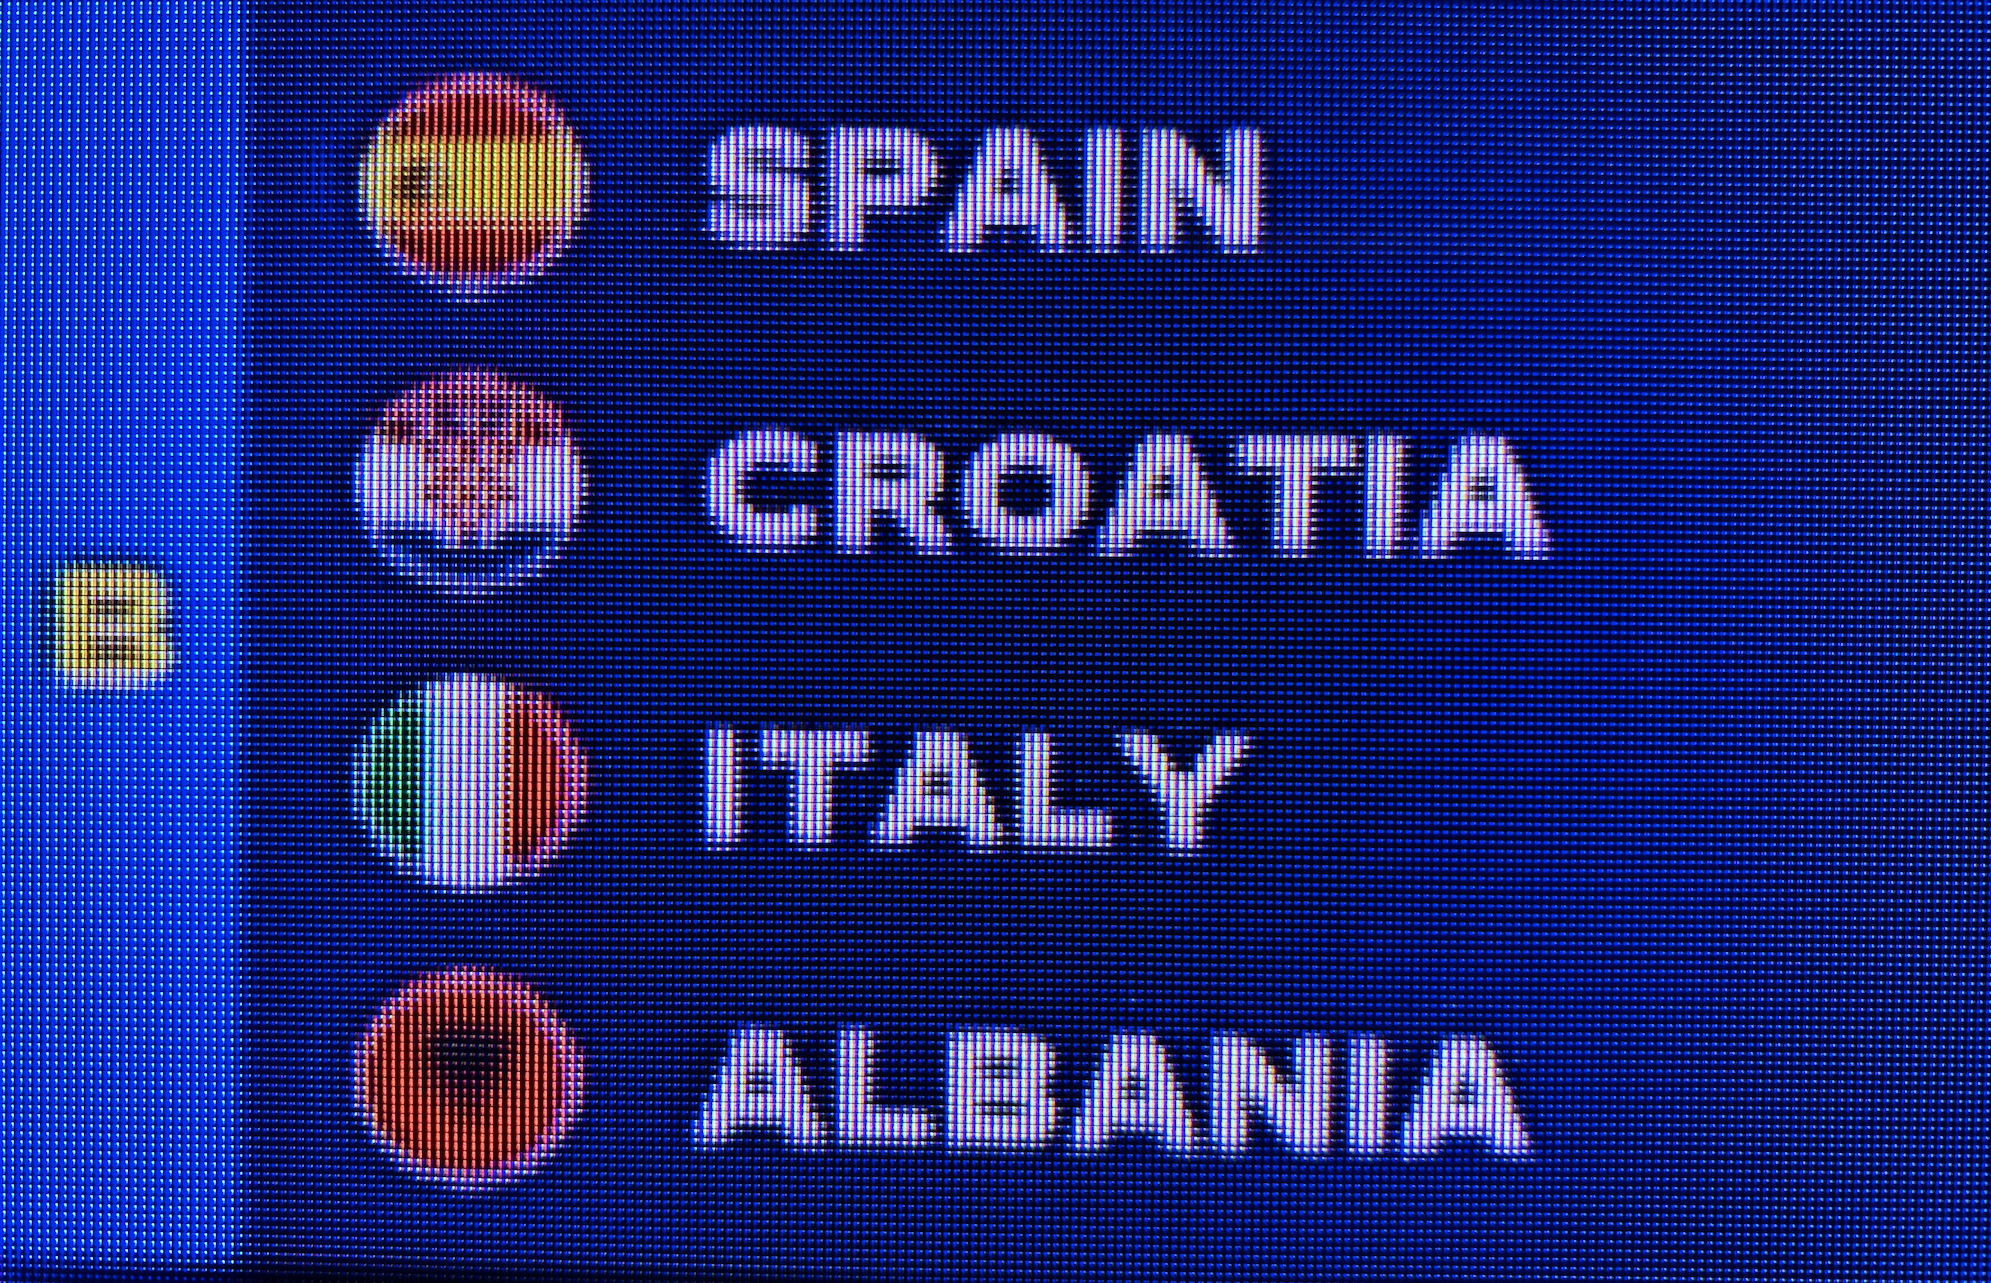 Croatia Drawn With Spain, Albania, Italy In Euro 2024 'Group of Death'!